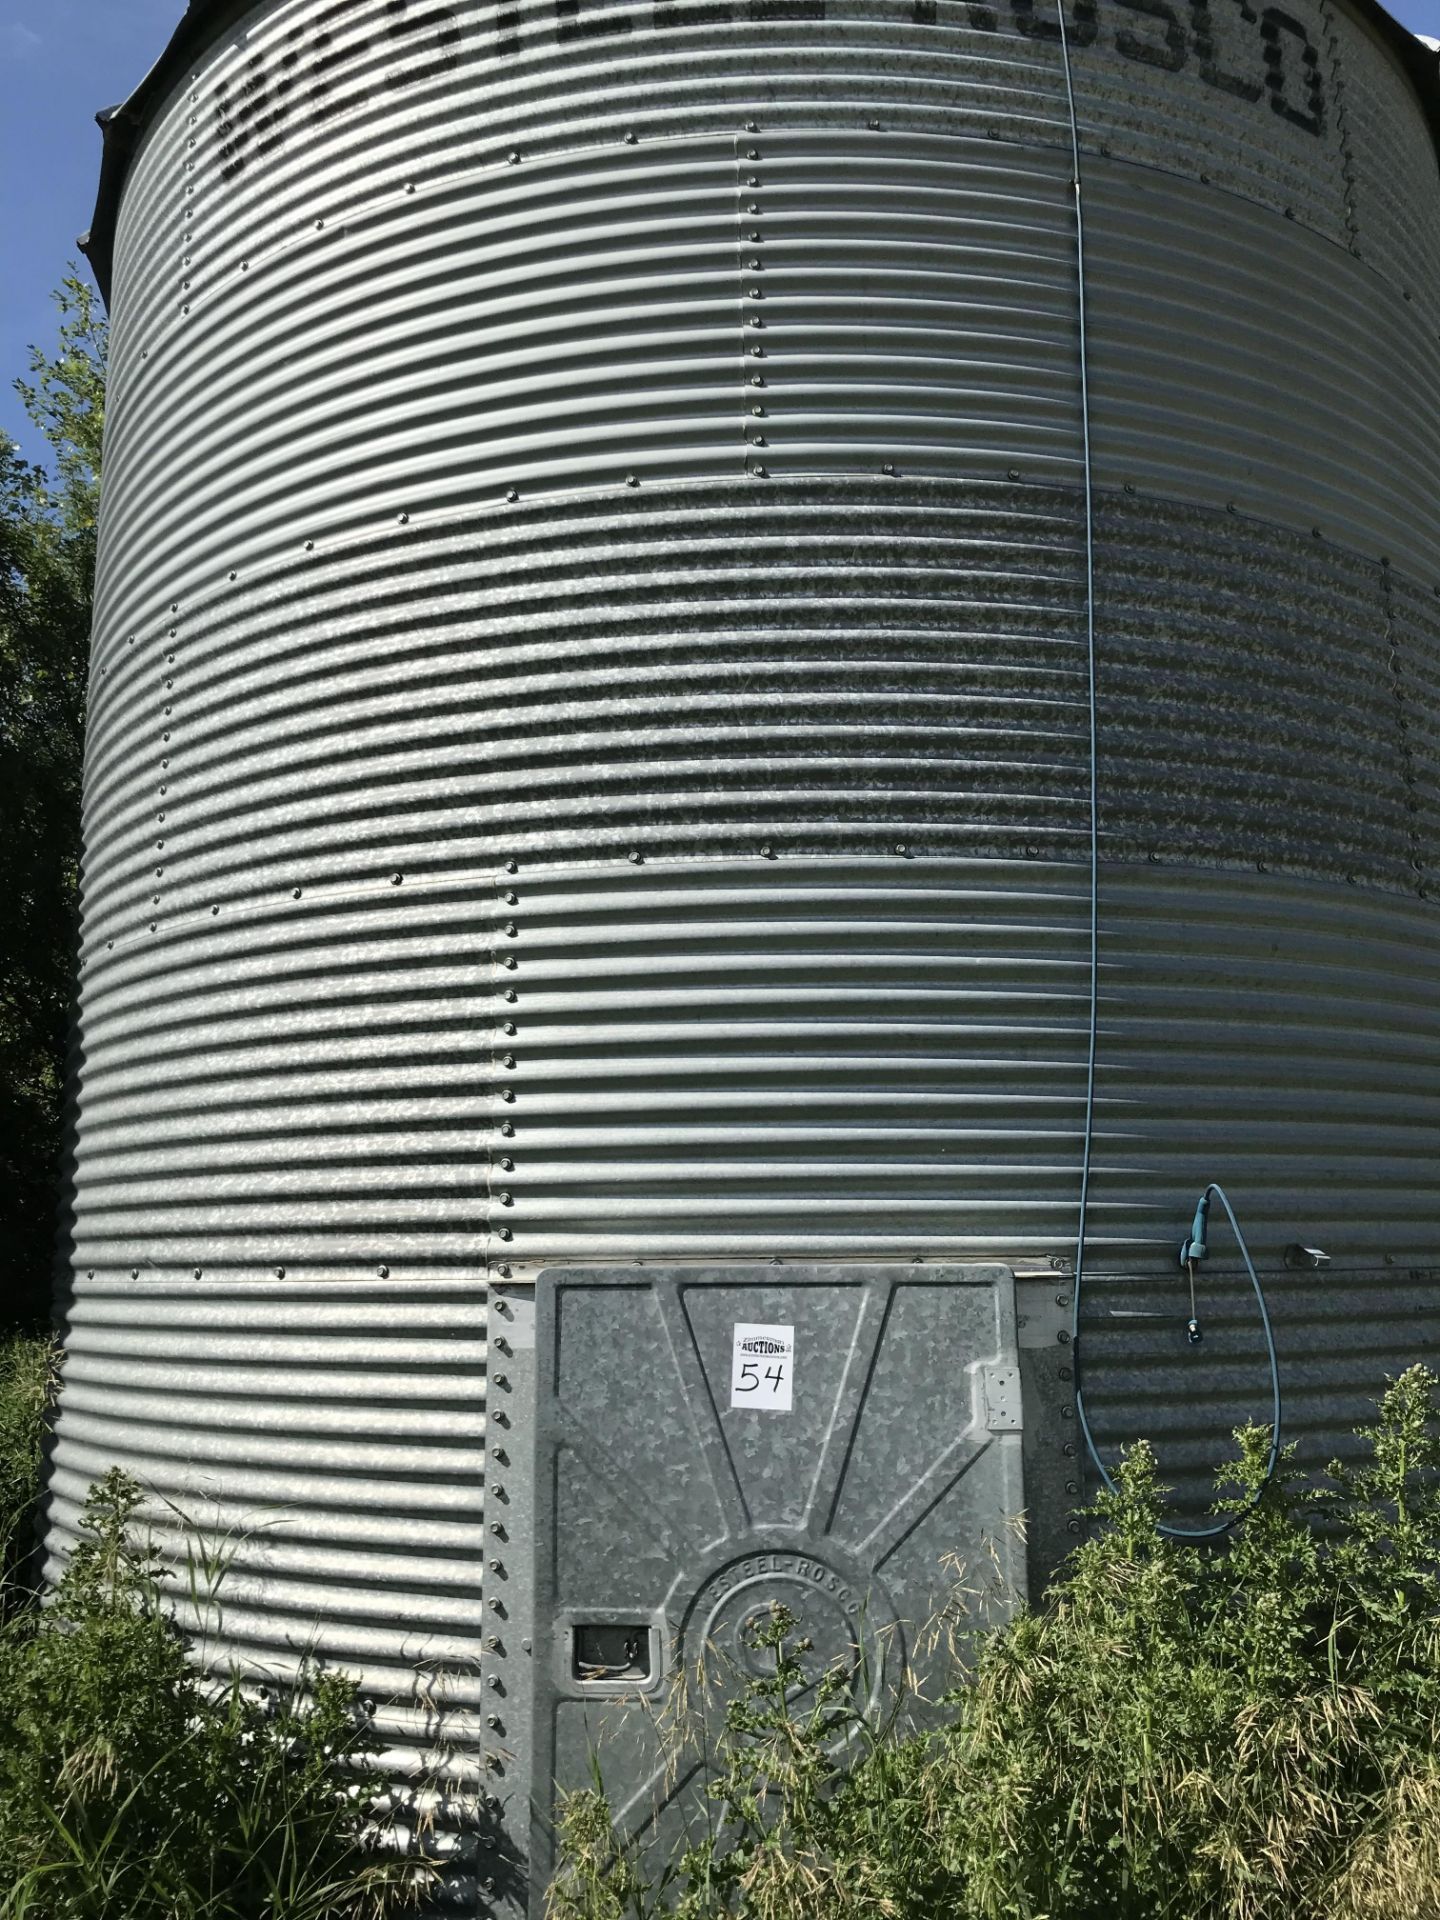 Westeel Rosco 6 Ring Bin -must be removed by Sept. 1, 2022 - Image 2 of 3